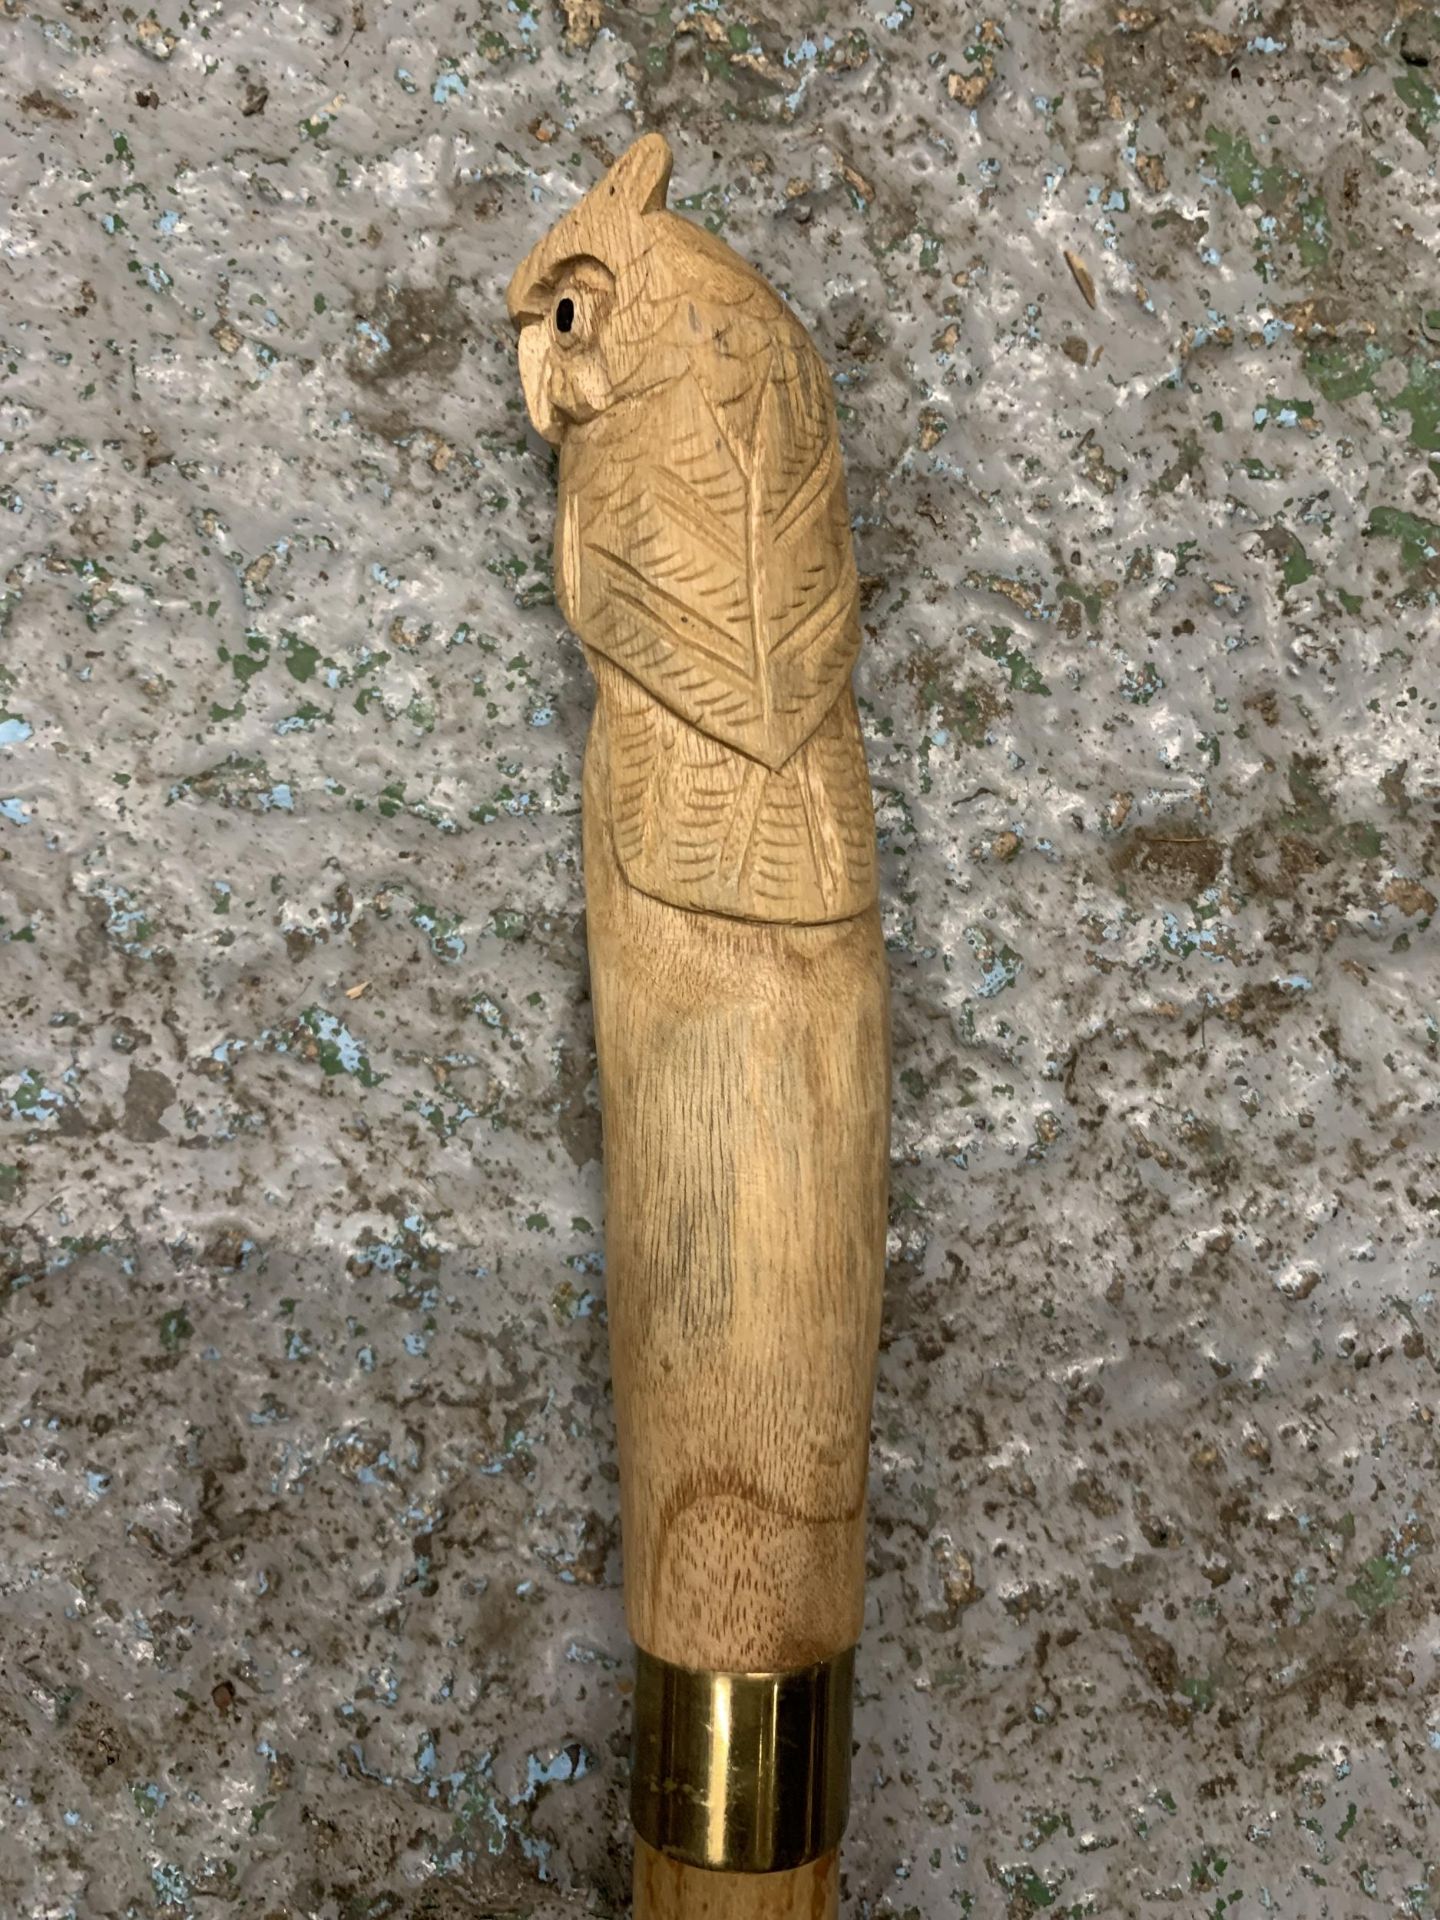 A WOODEN WALKING STICK WITH A CARVED OWL FINIAL - Image 2 of 4